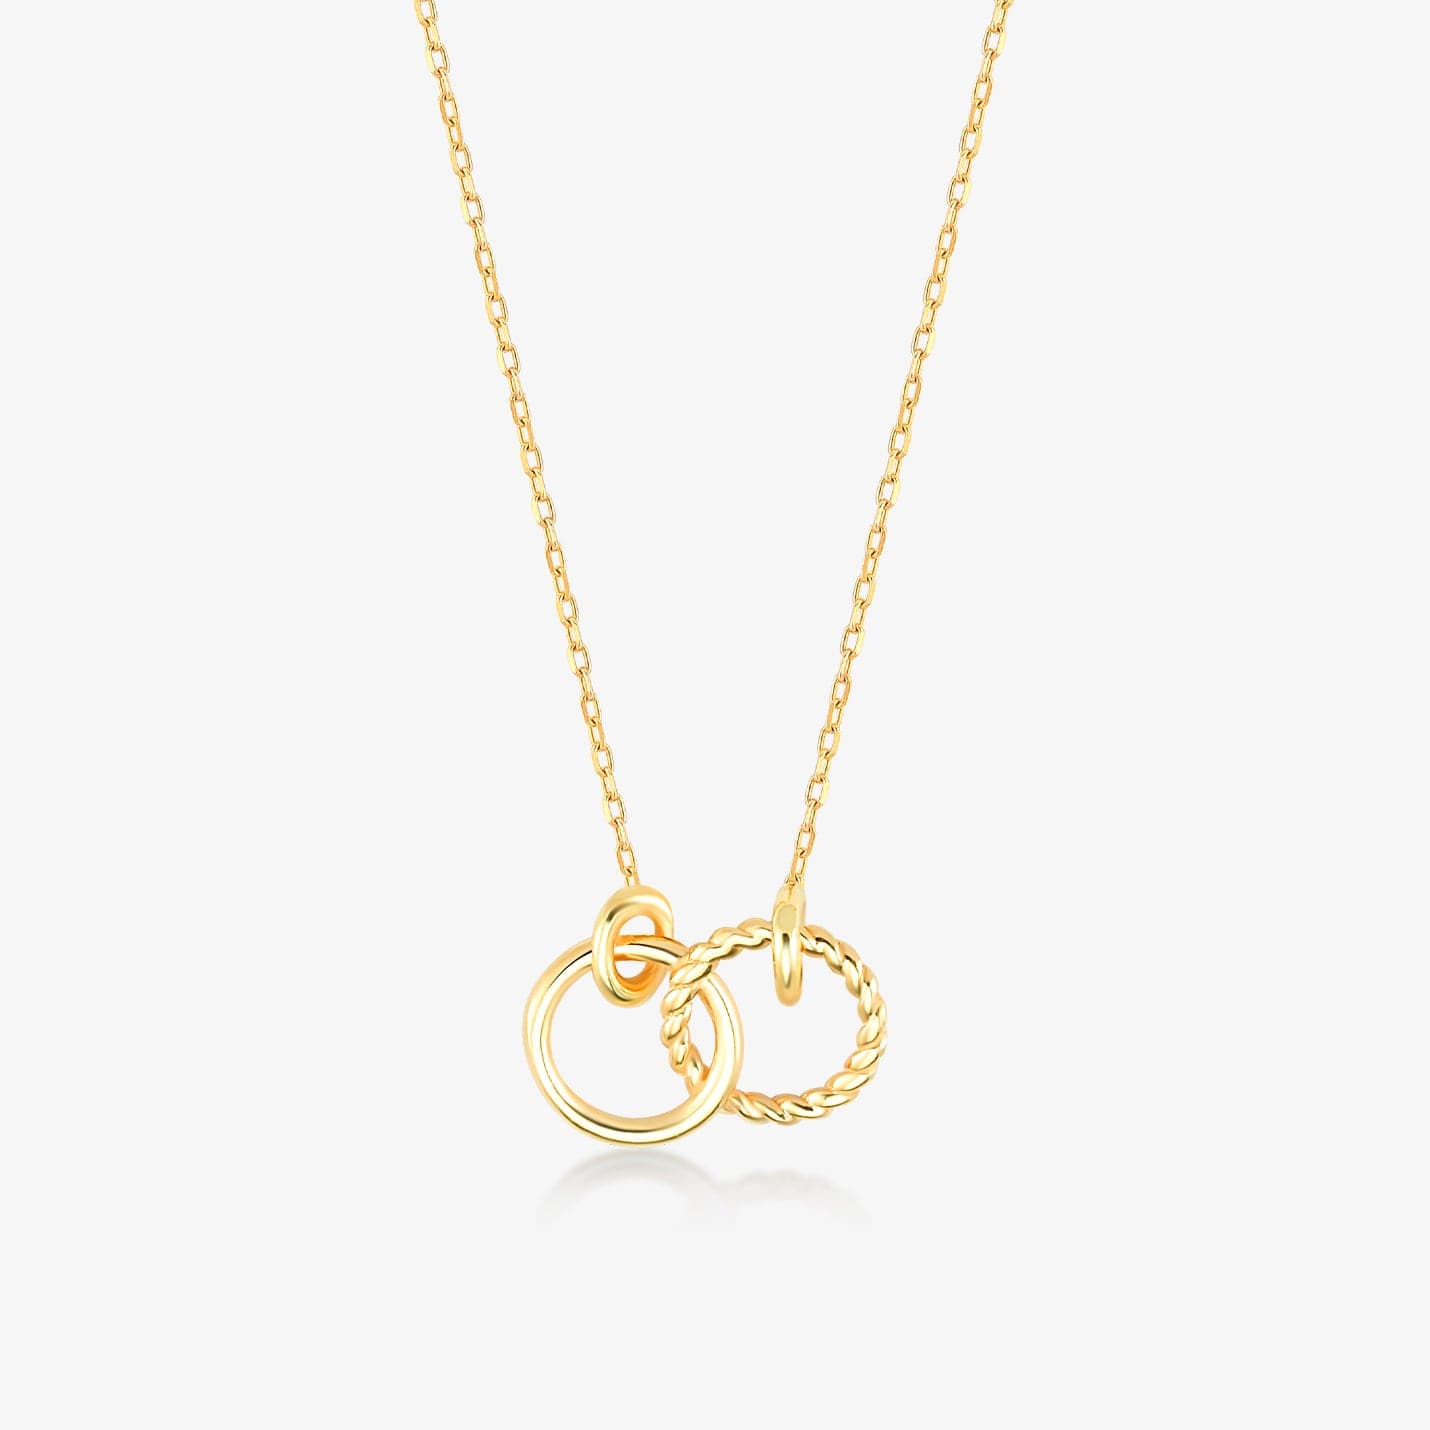 Interlocking Circle Necklace for Women in 14k Gold - Ring Necklace